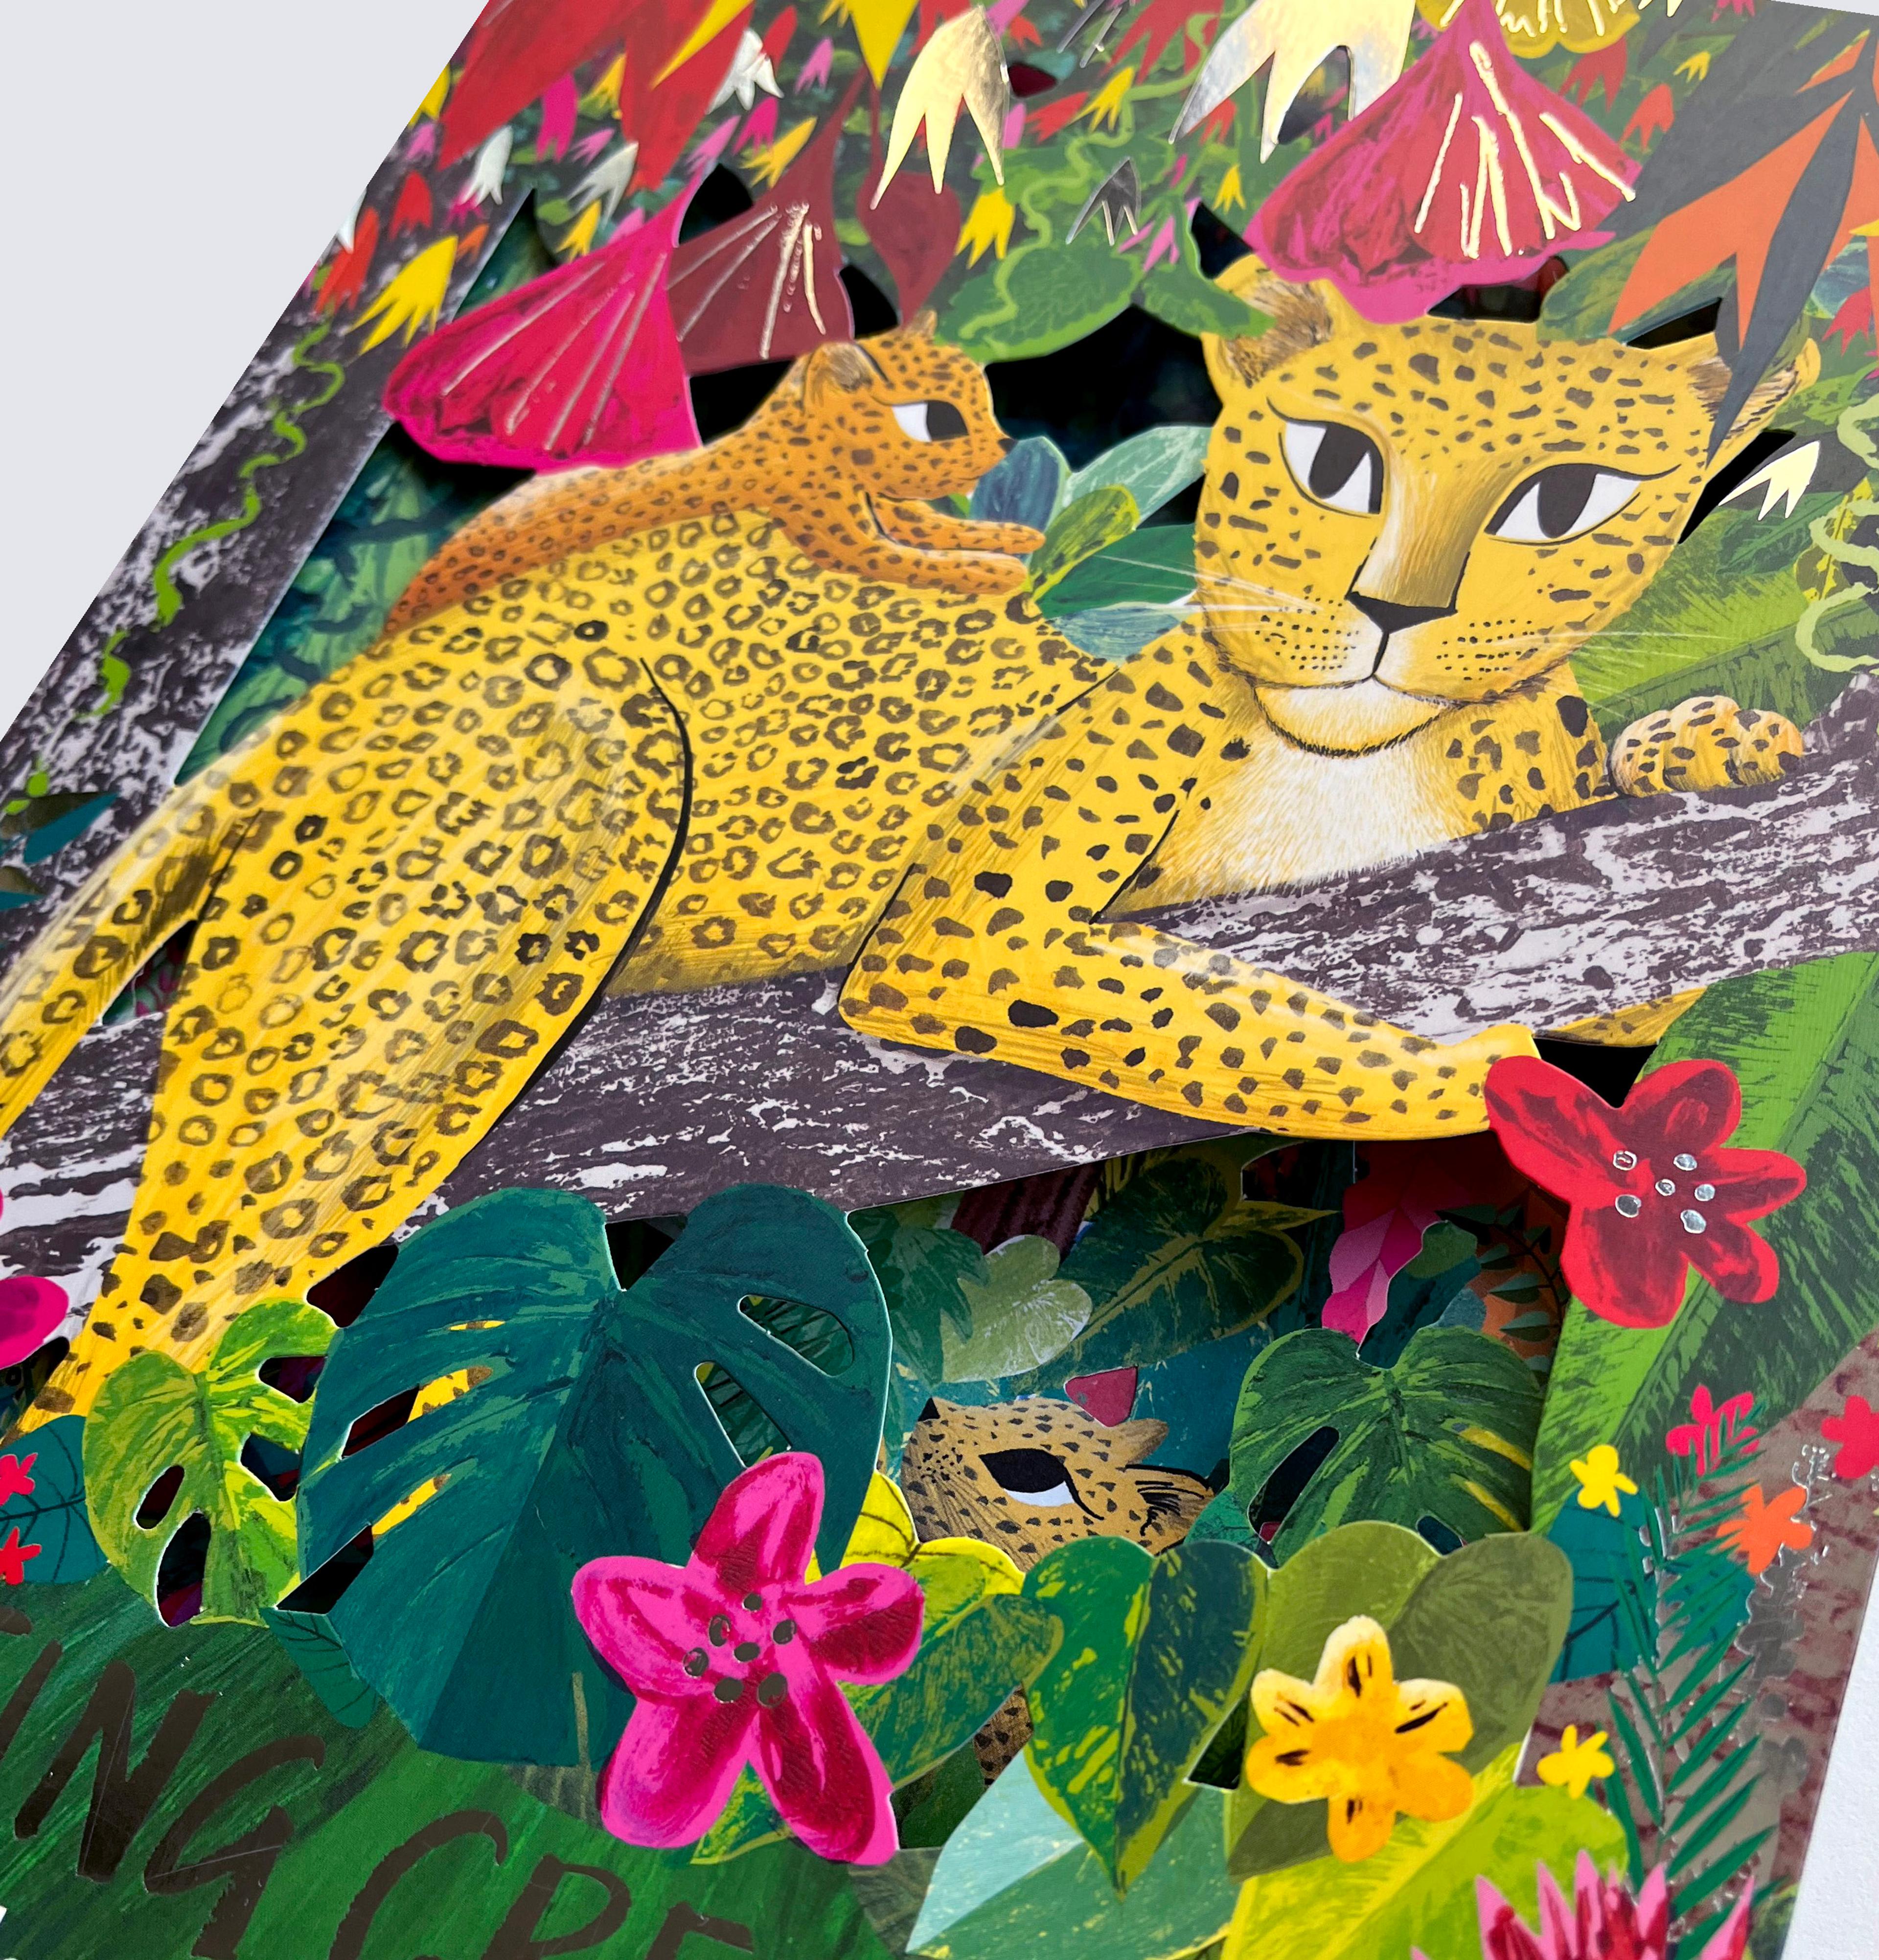 Cover of three dimensional picture book showing a leopard